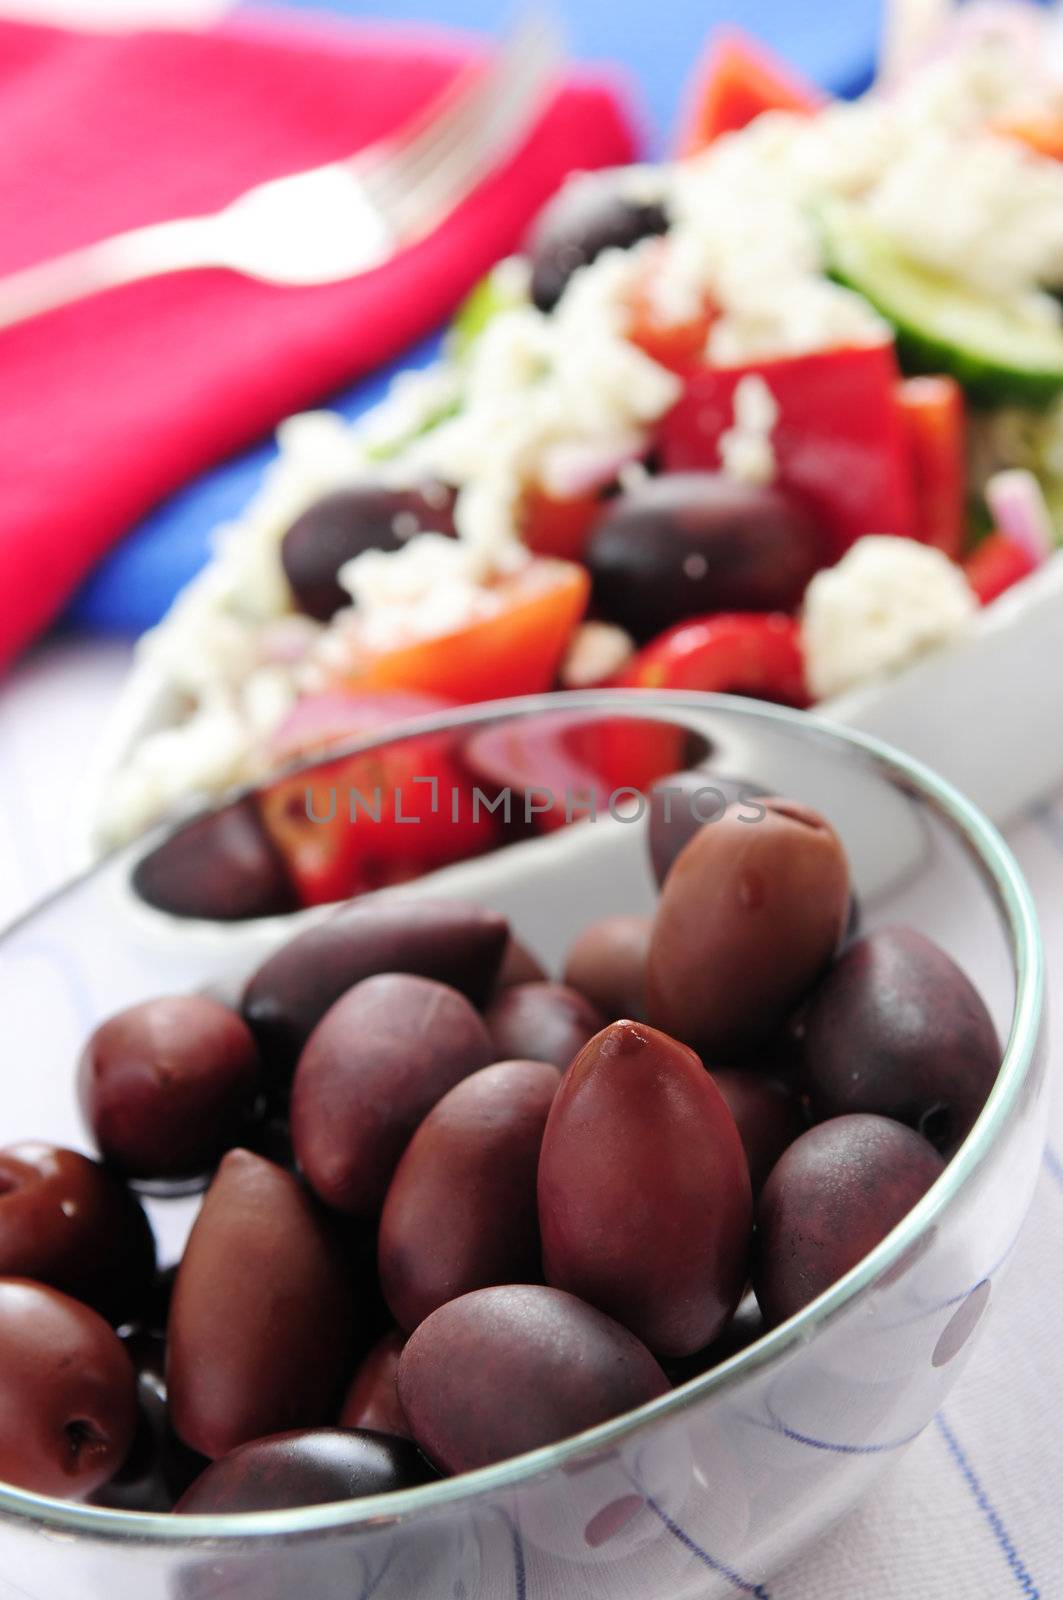 Olives and greek salad by elenathewise